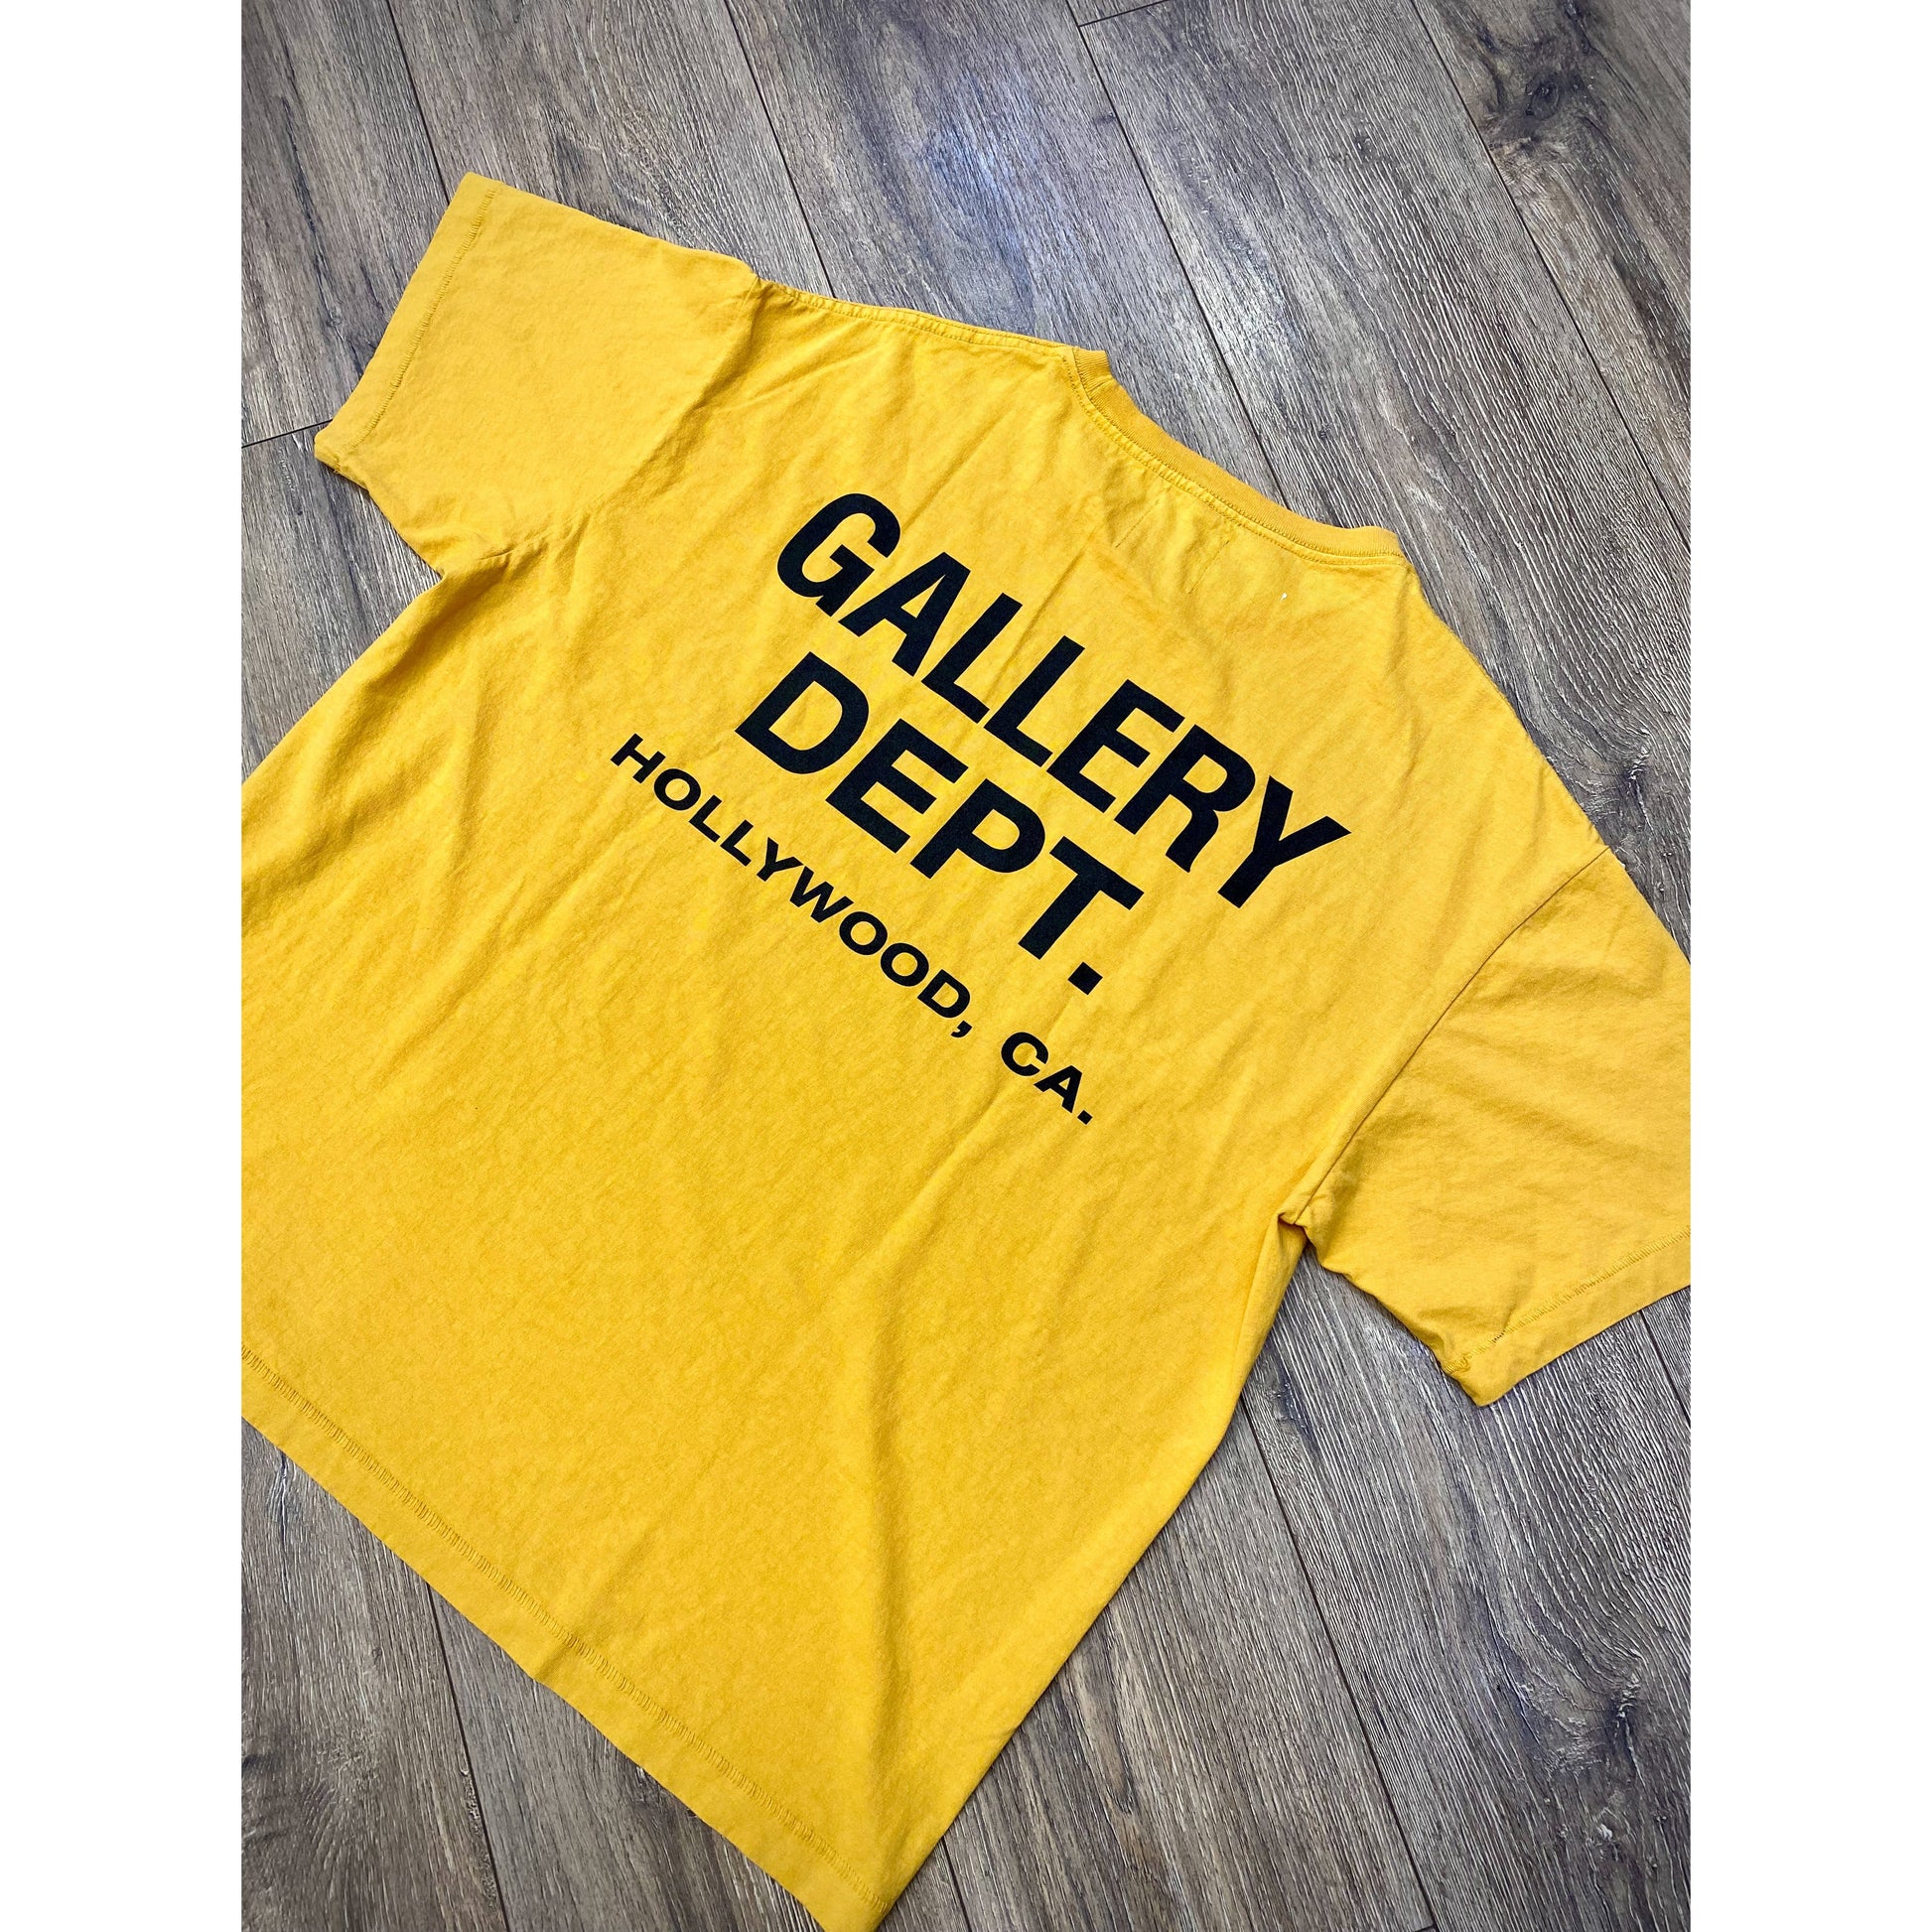 Gallery Dept. Vintage Souvenir T-Shirt Yellow from GALLERY DEPT.